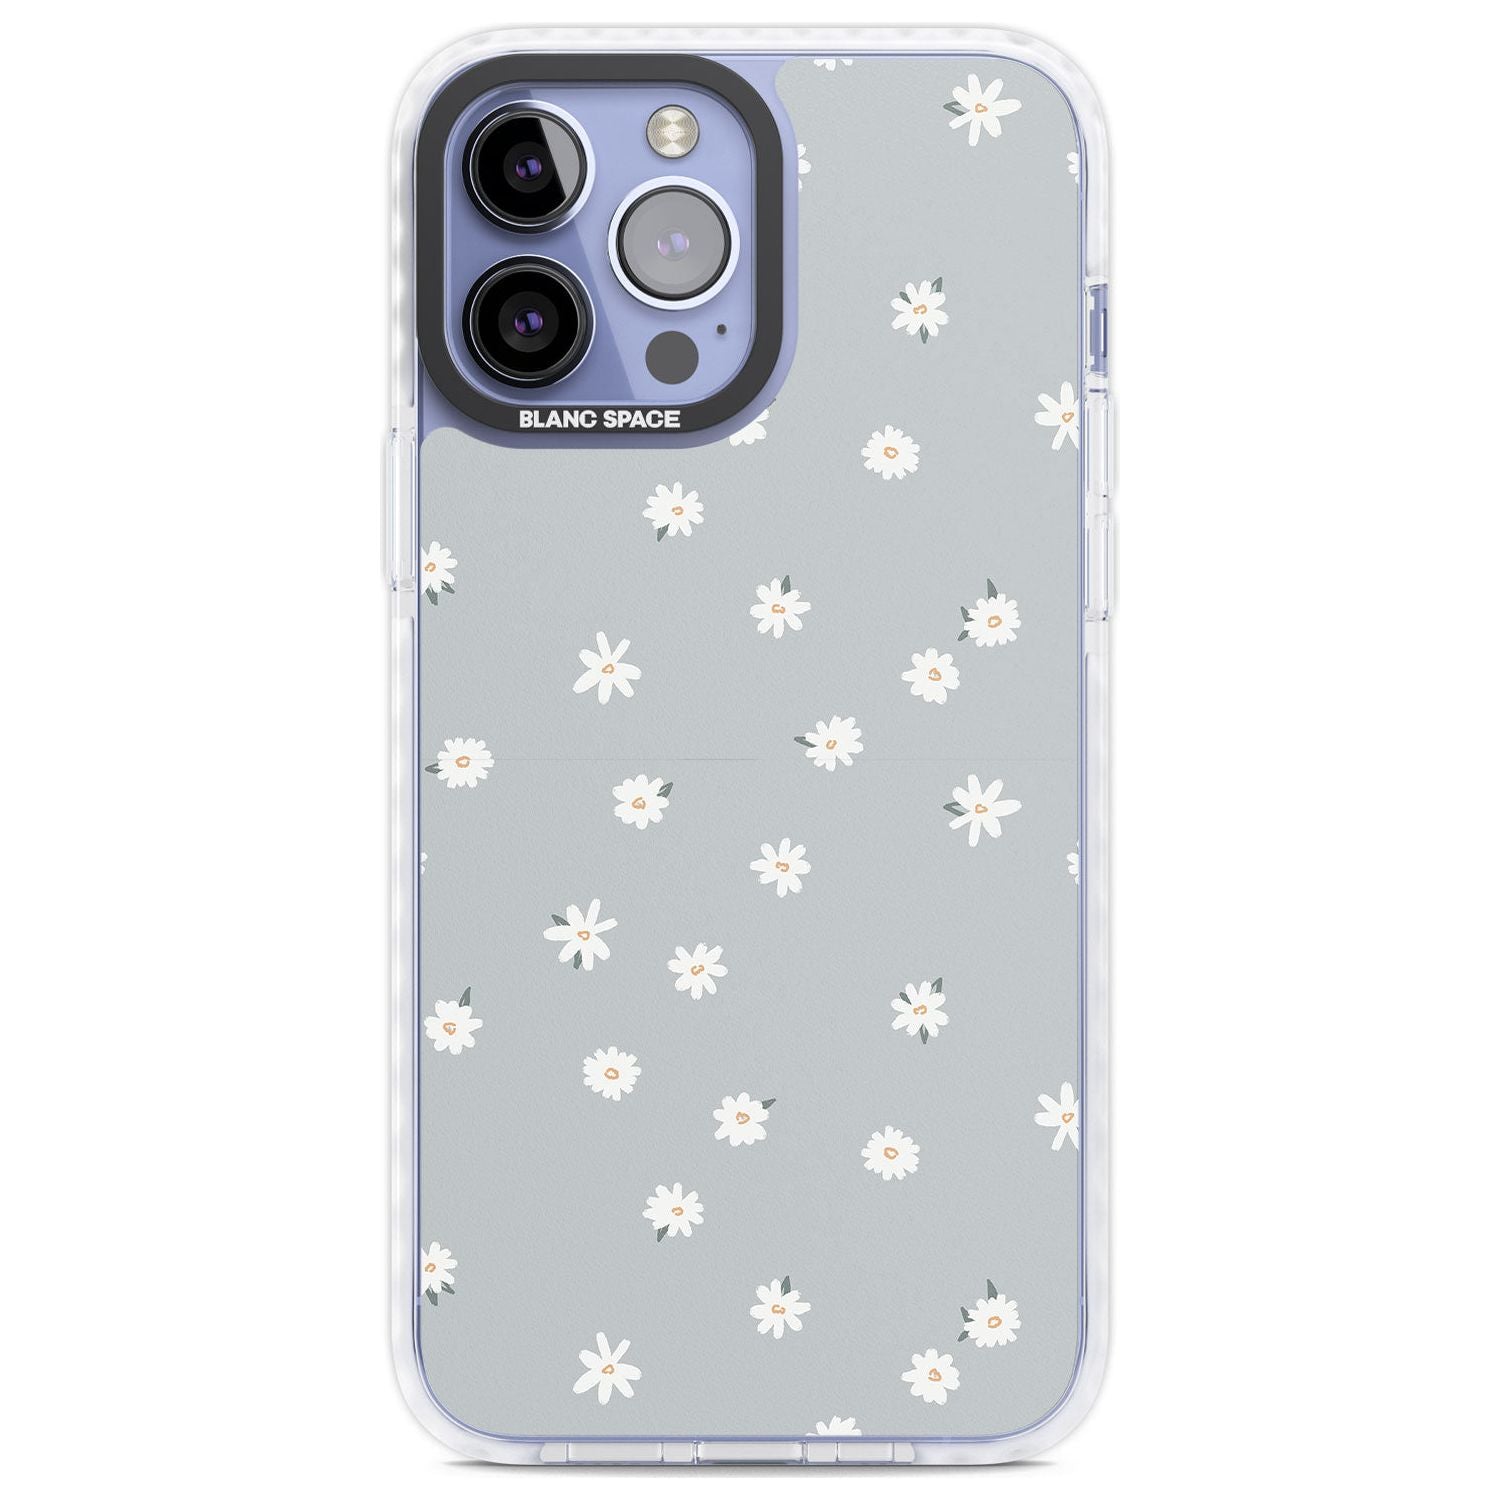 Painted Daisy Blue-Grey Cute Phone Case iPhone 13 Pro Max / Impact Case,iPhone 14 Pro Max / Impact Case Blanc Space